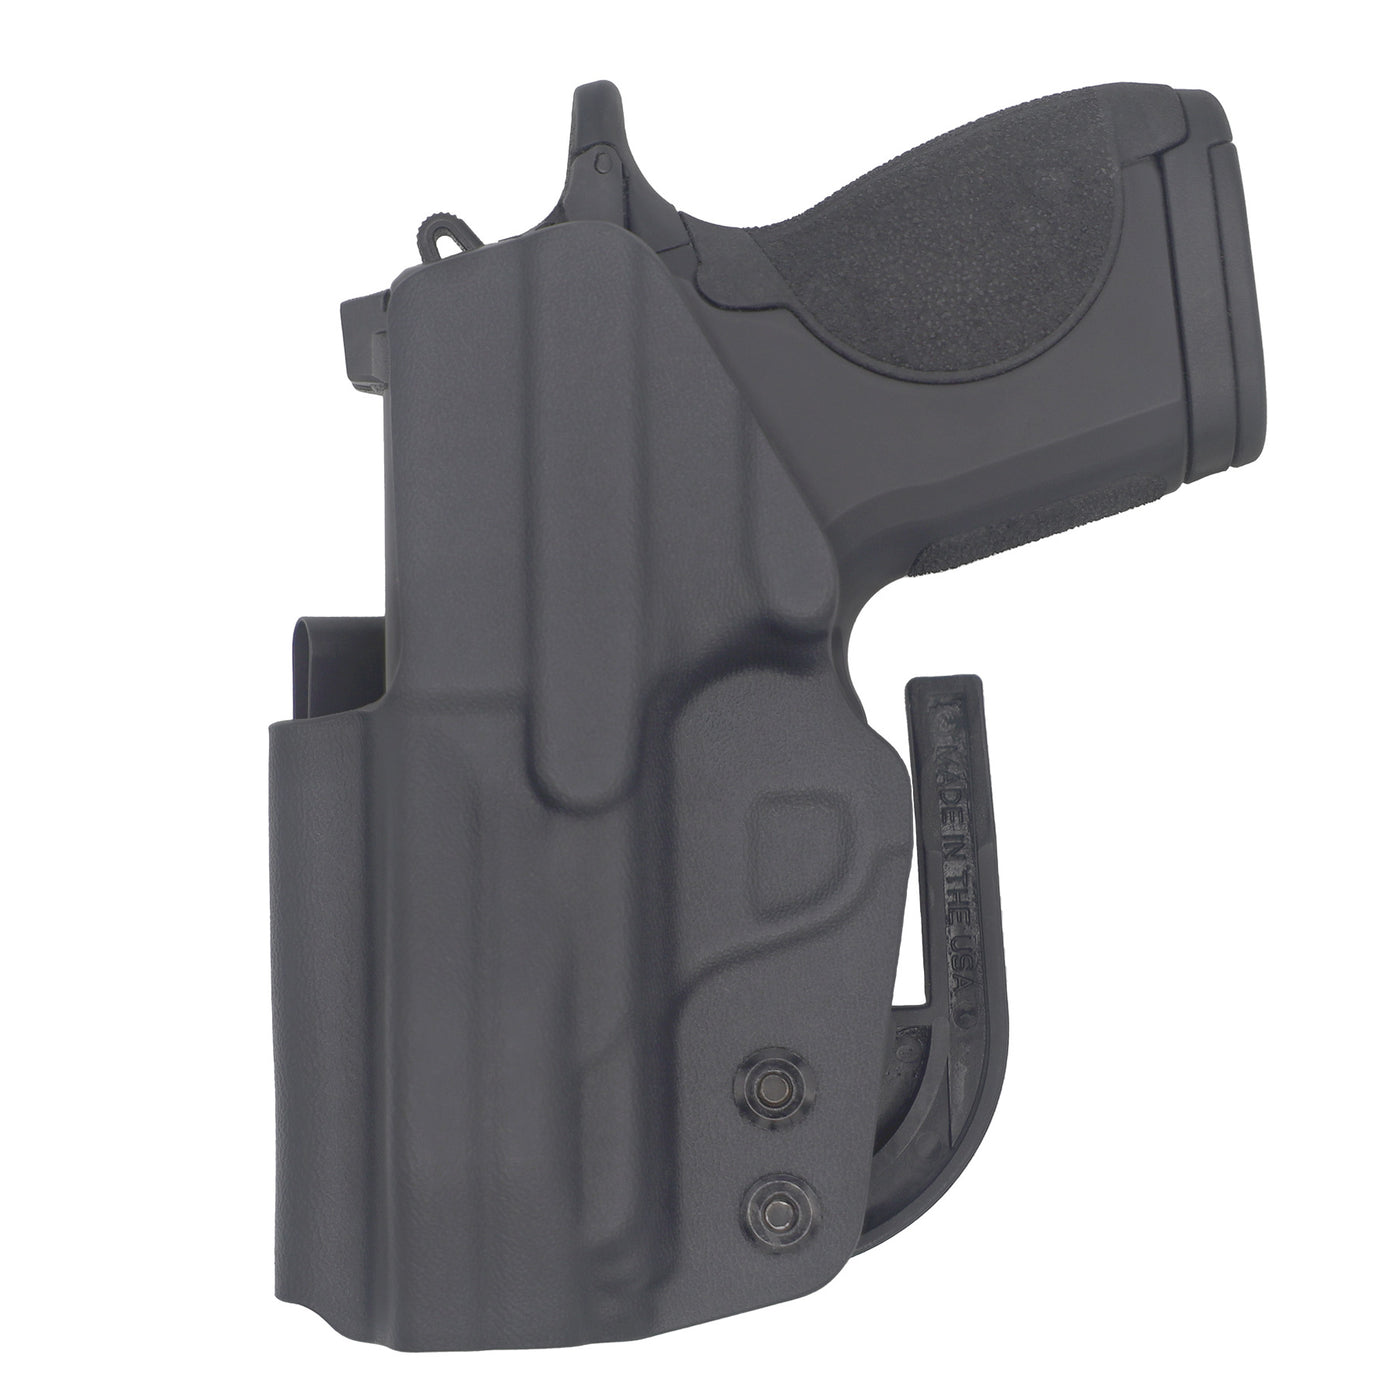 C&G Holsters custom IWB ALPHA UPGRADE Covert S&W CSX in holstered position back view